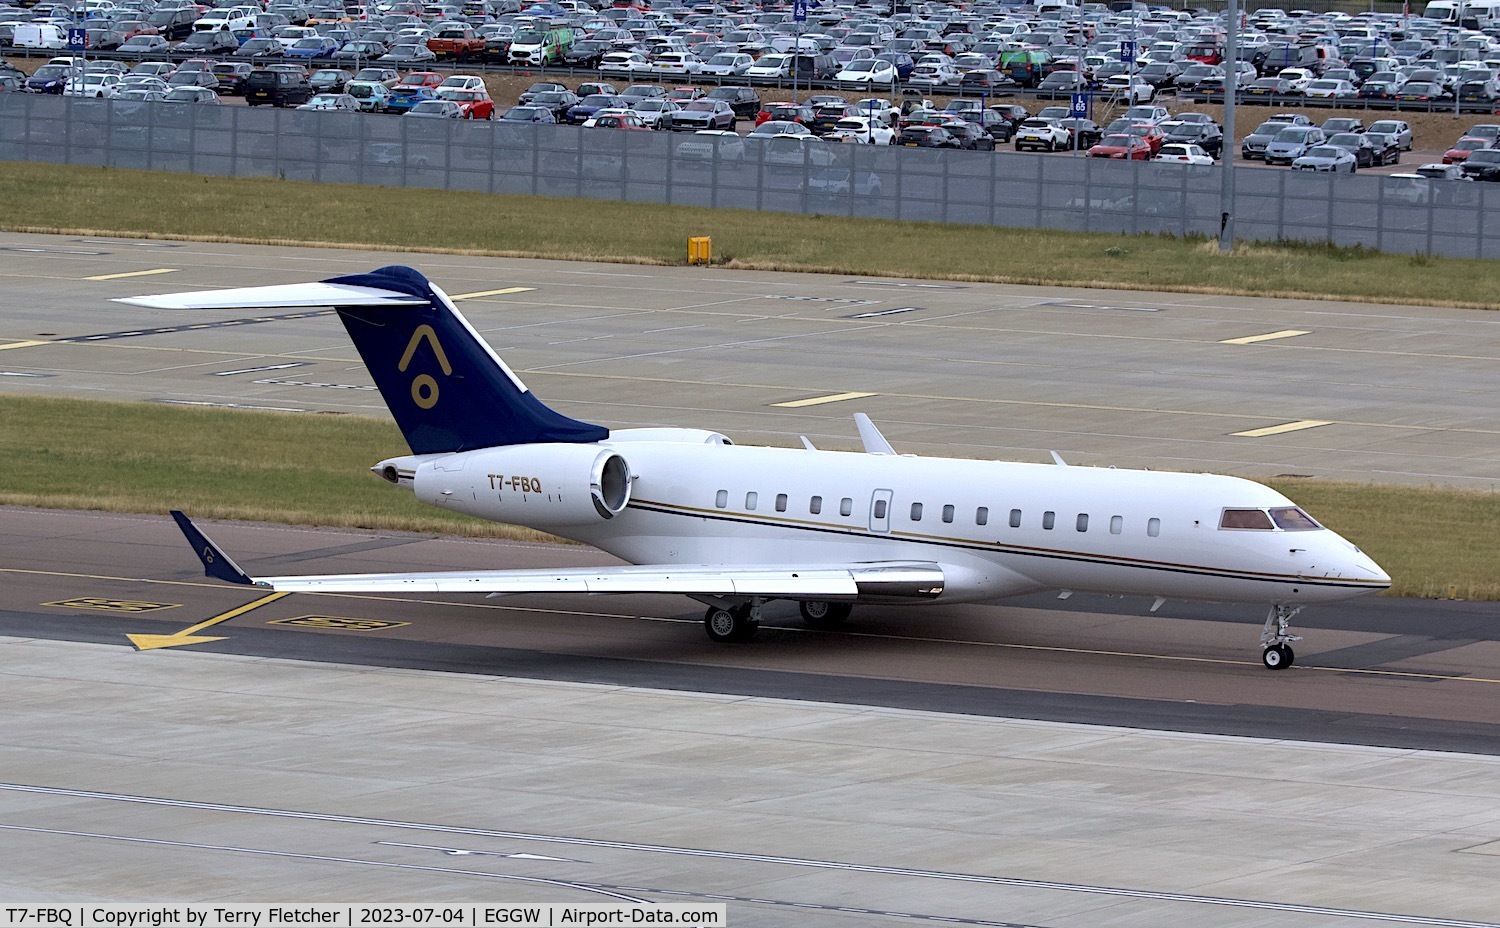 T7-FBQ, 2007 Bombardier BD-700-1A11 Global 5000 C/N 9282, At Luton Airport